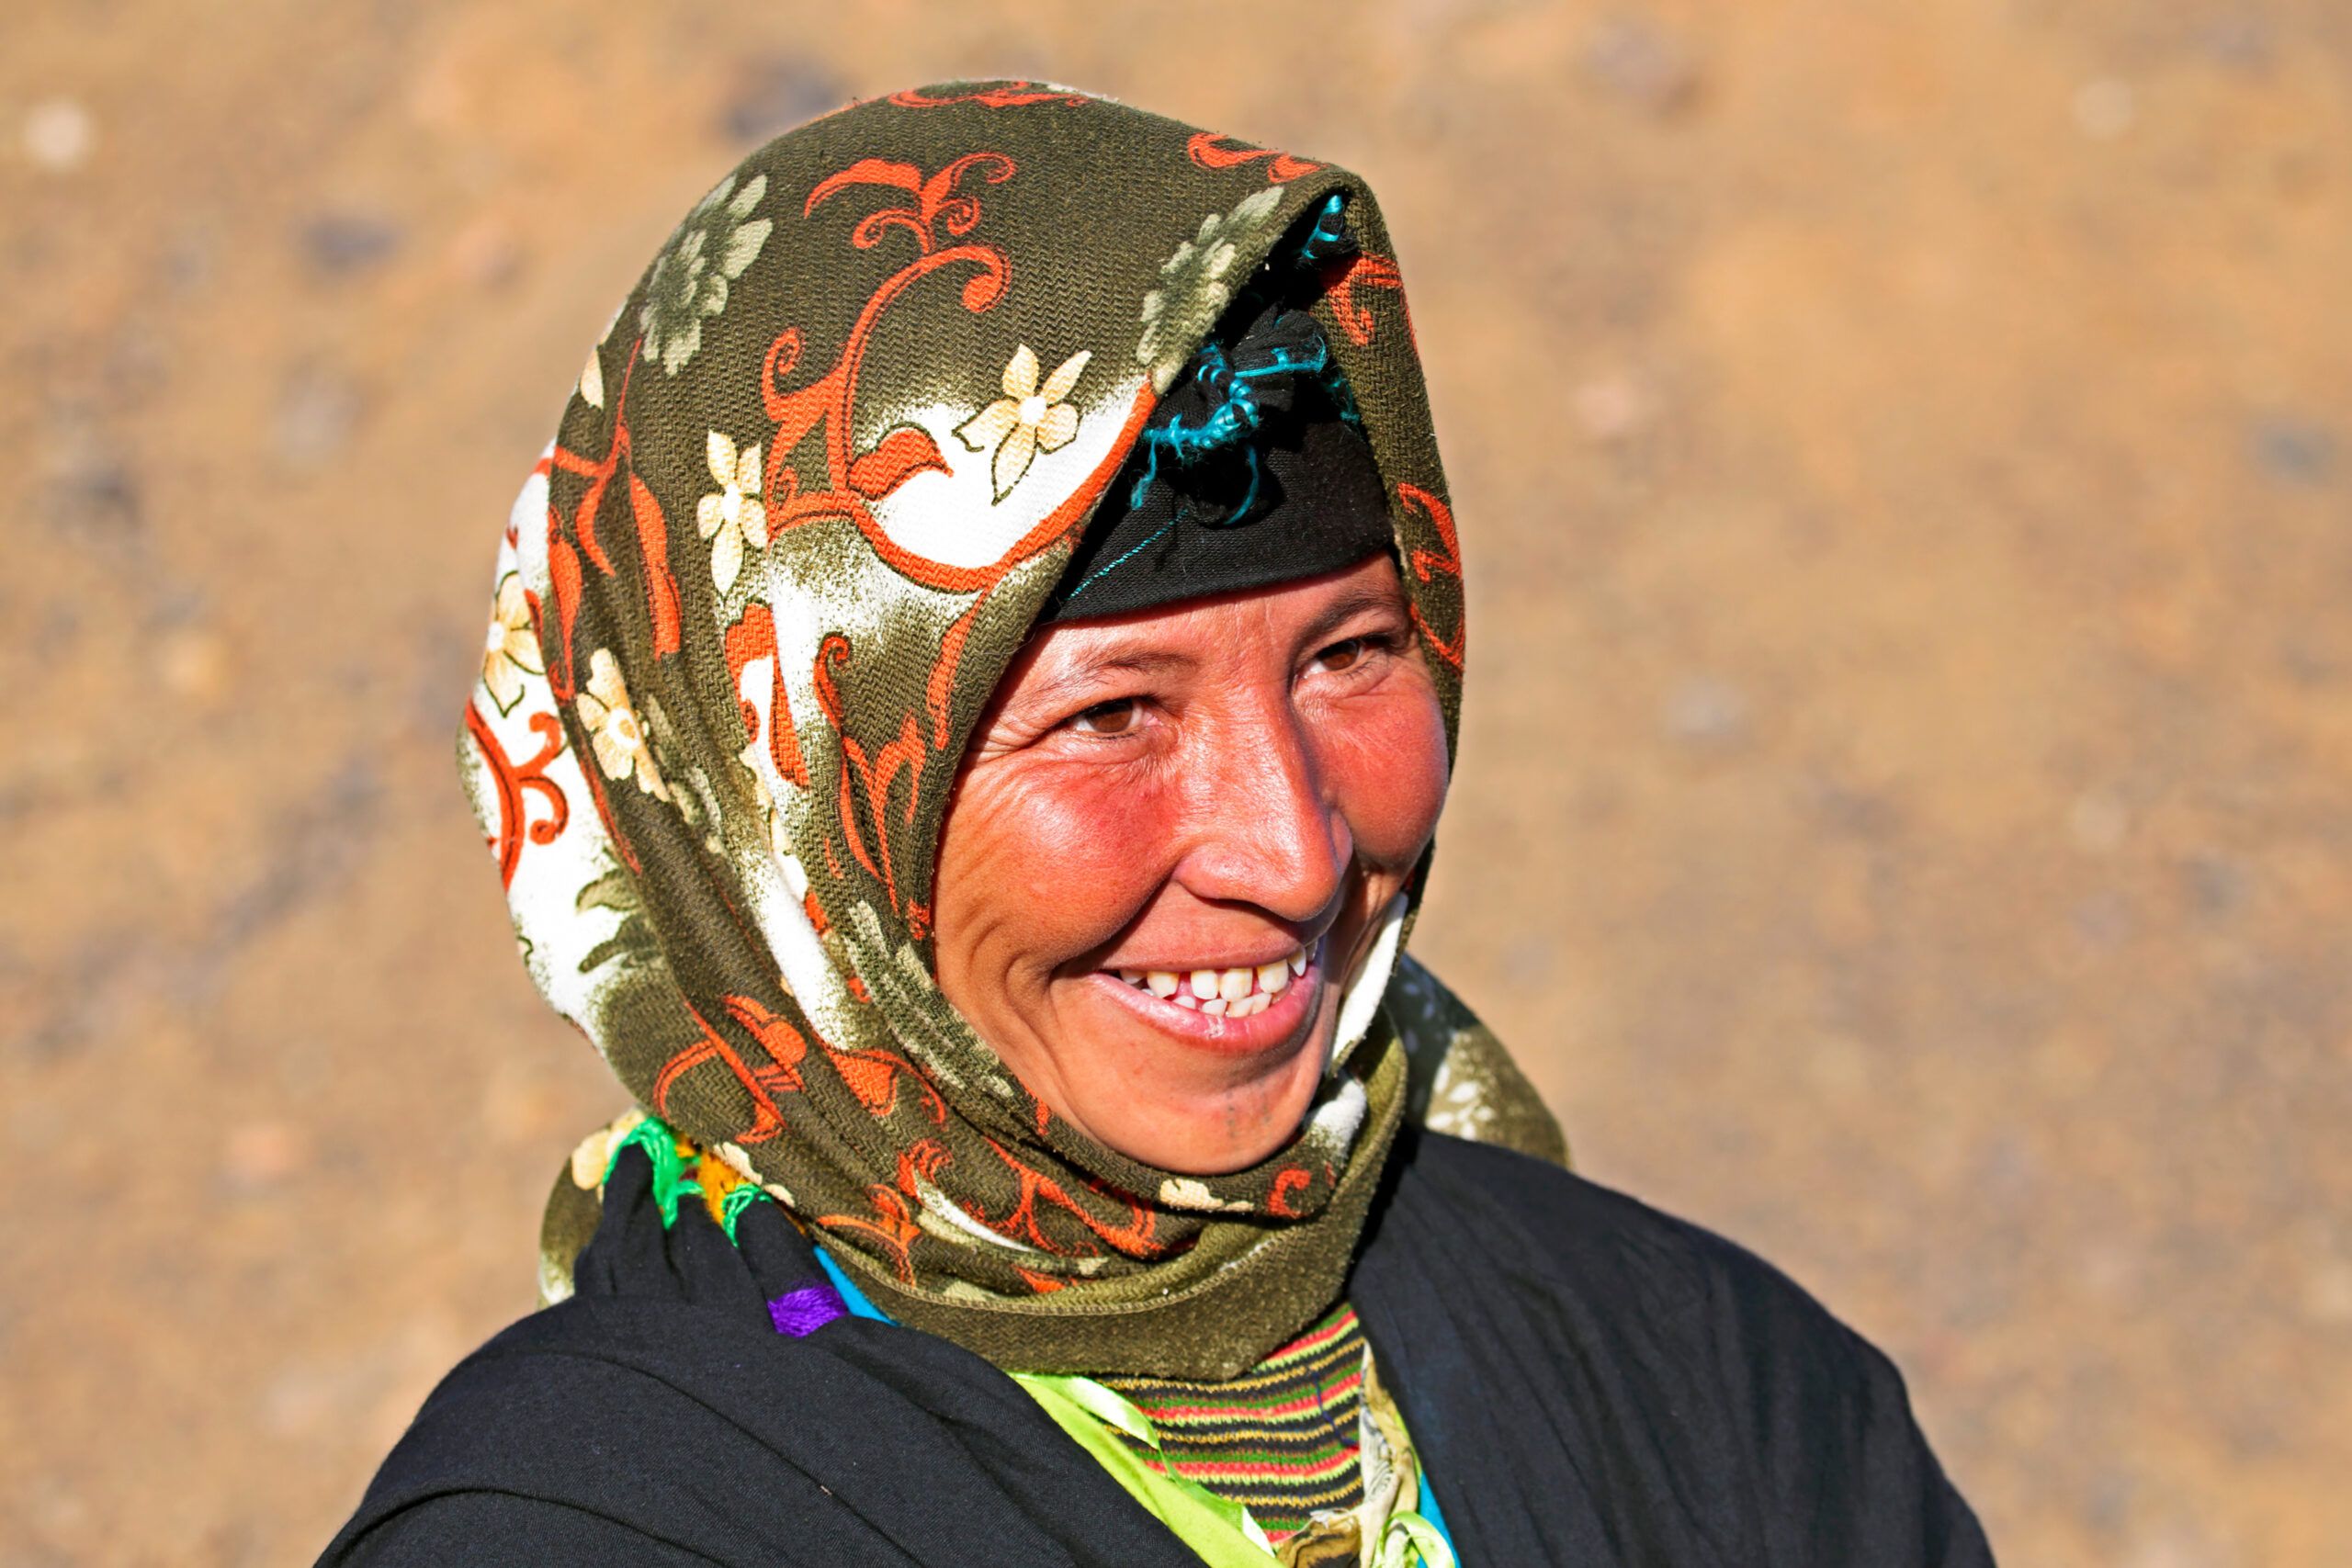 Young nomad person in the desert with headscarf